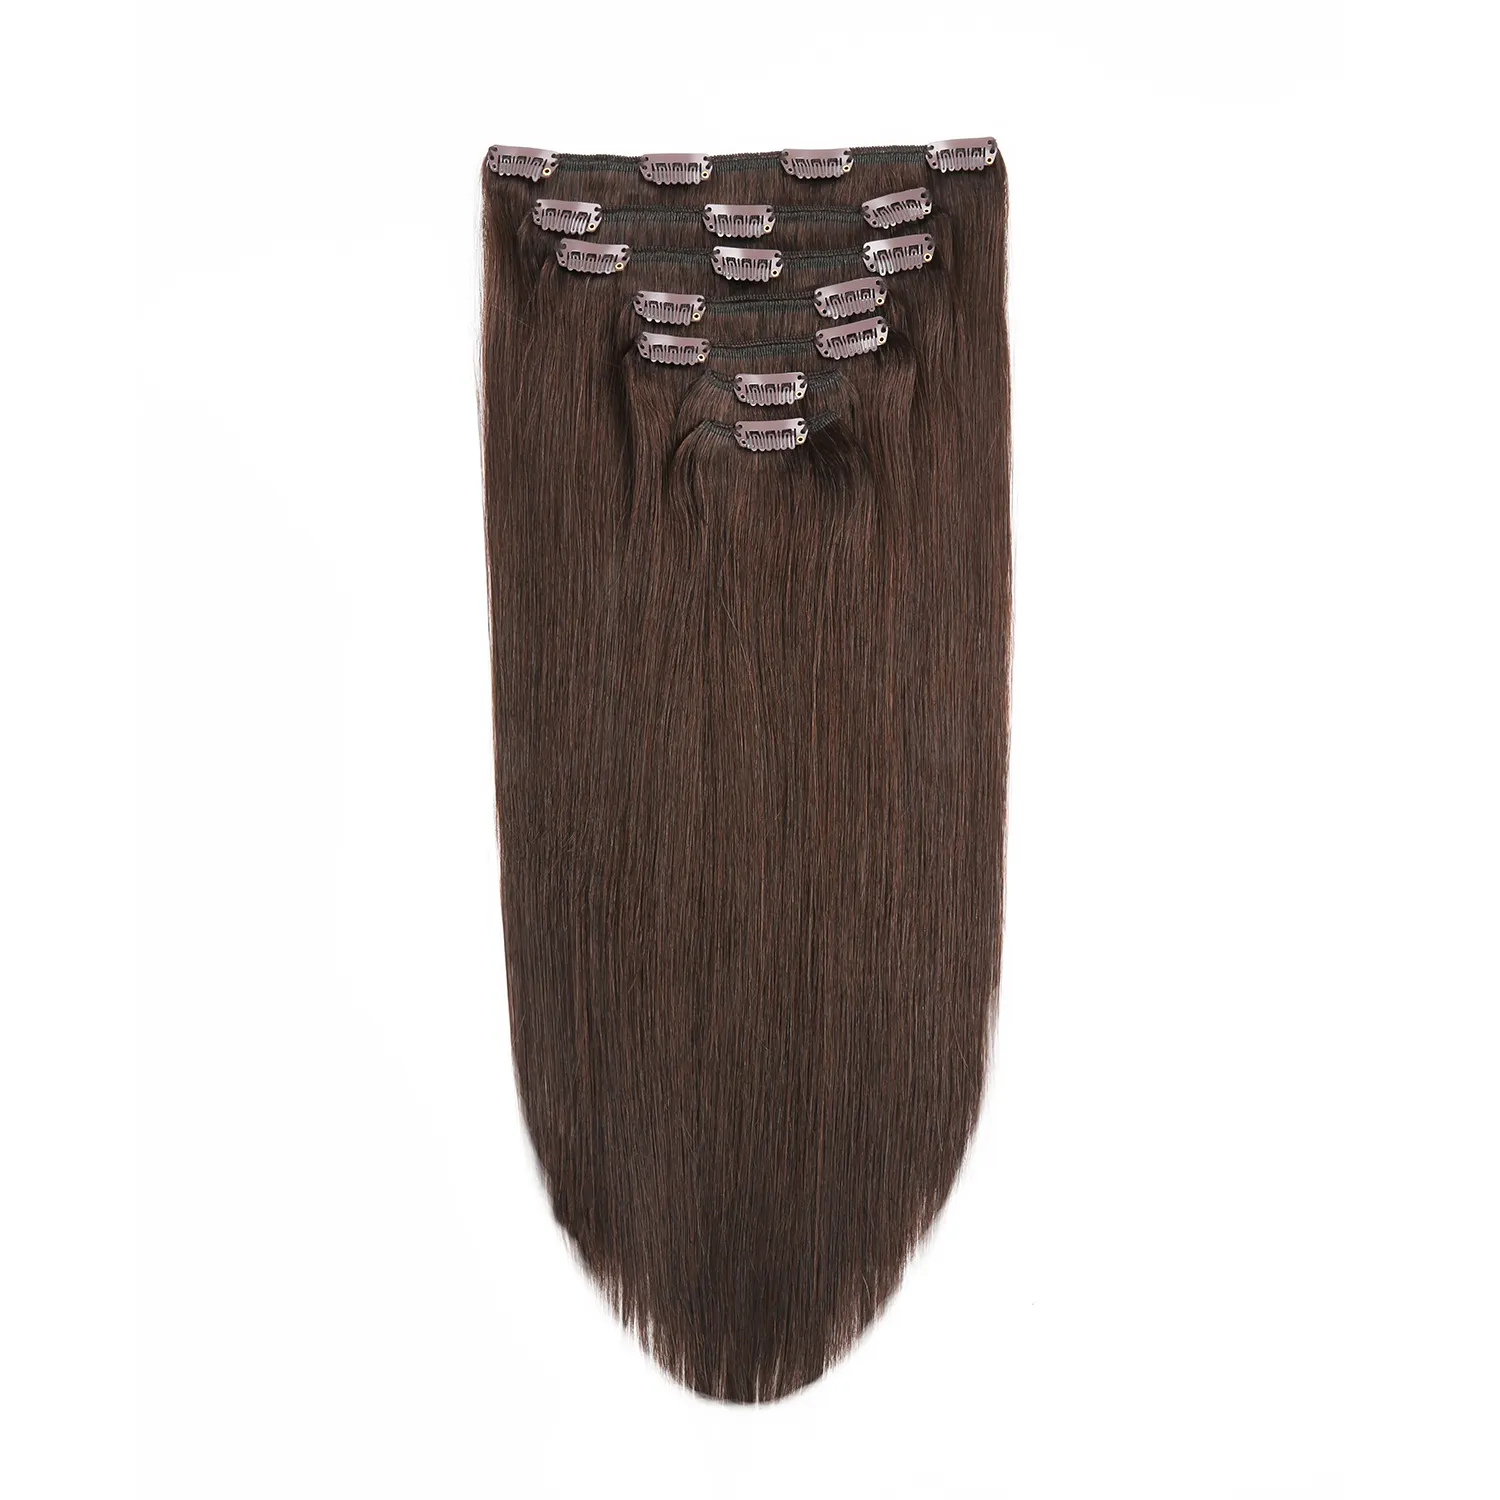 Wholesale Remy Human Hair Extensions clip ins for Women Double Weft Human Hair Clip in Extensions clip in hair extension colored